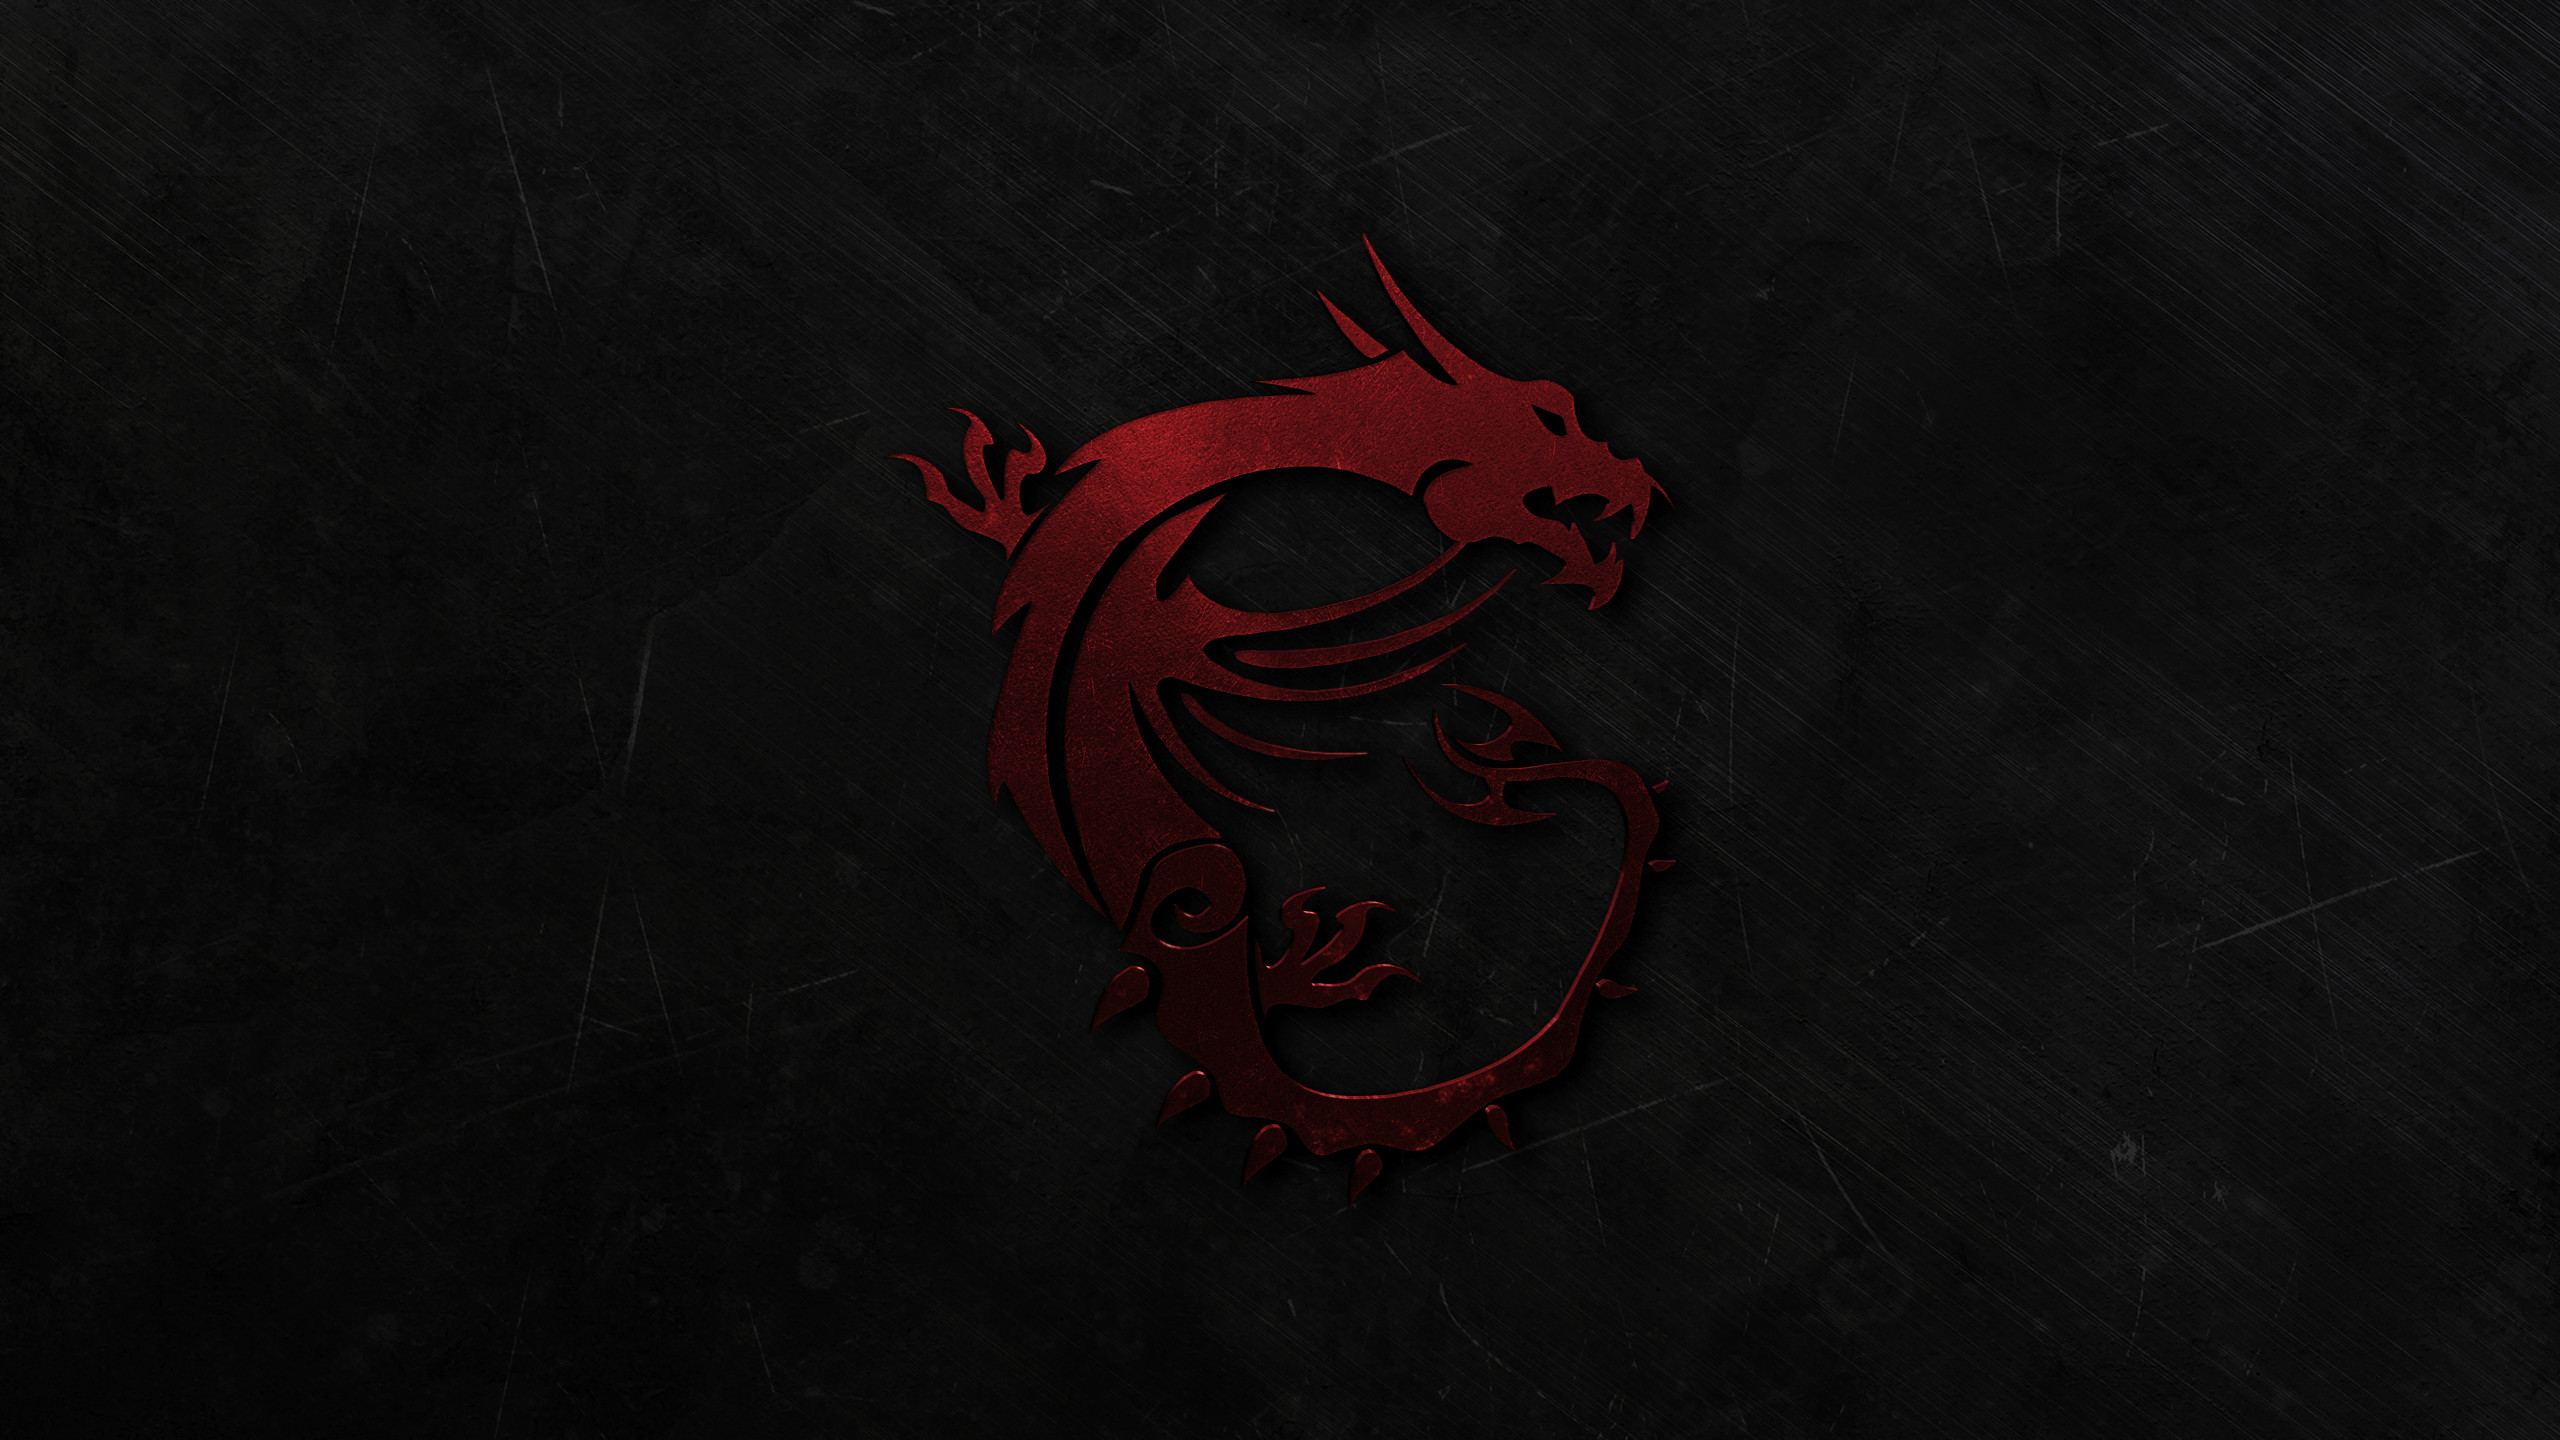 Hi Everyone I just made this MSI Wallpaper Feel free to use it D  Cheers  rMSILaptops